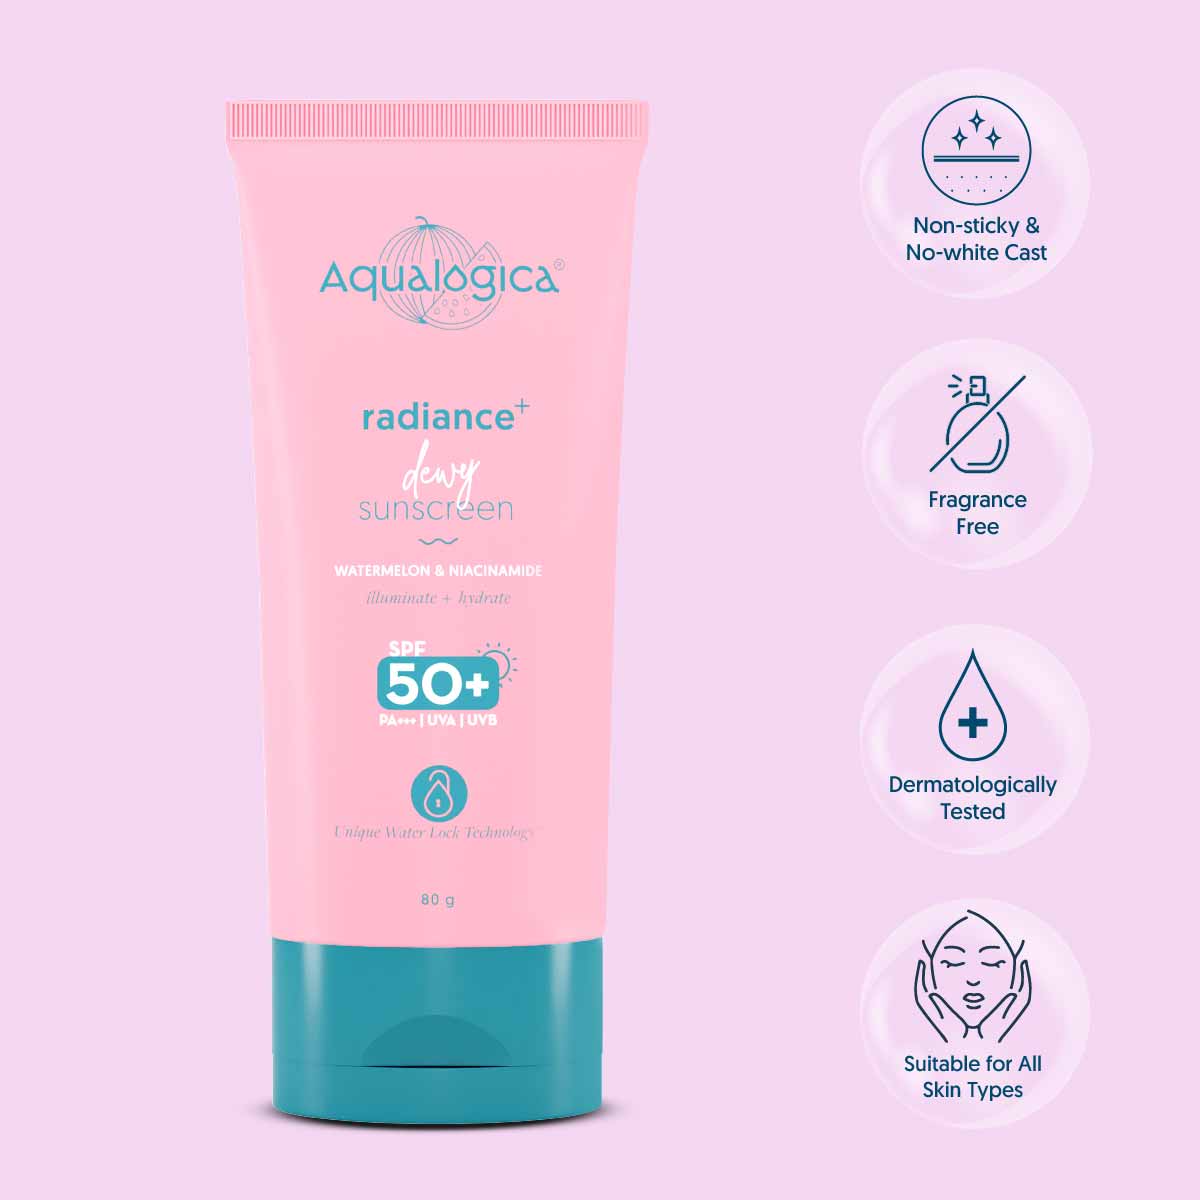 Radiance+ Dewy Sunscreen with SPF 50+ & PA+++ for UVA/B Protection & No White Cast - 80g